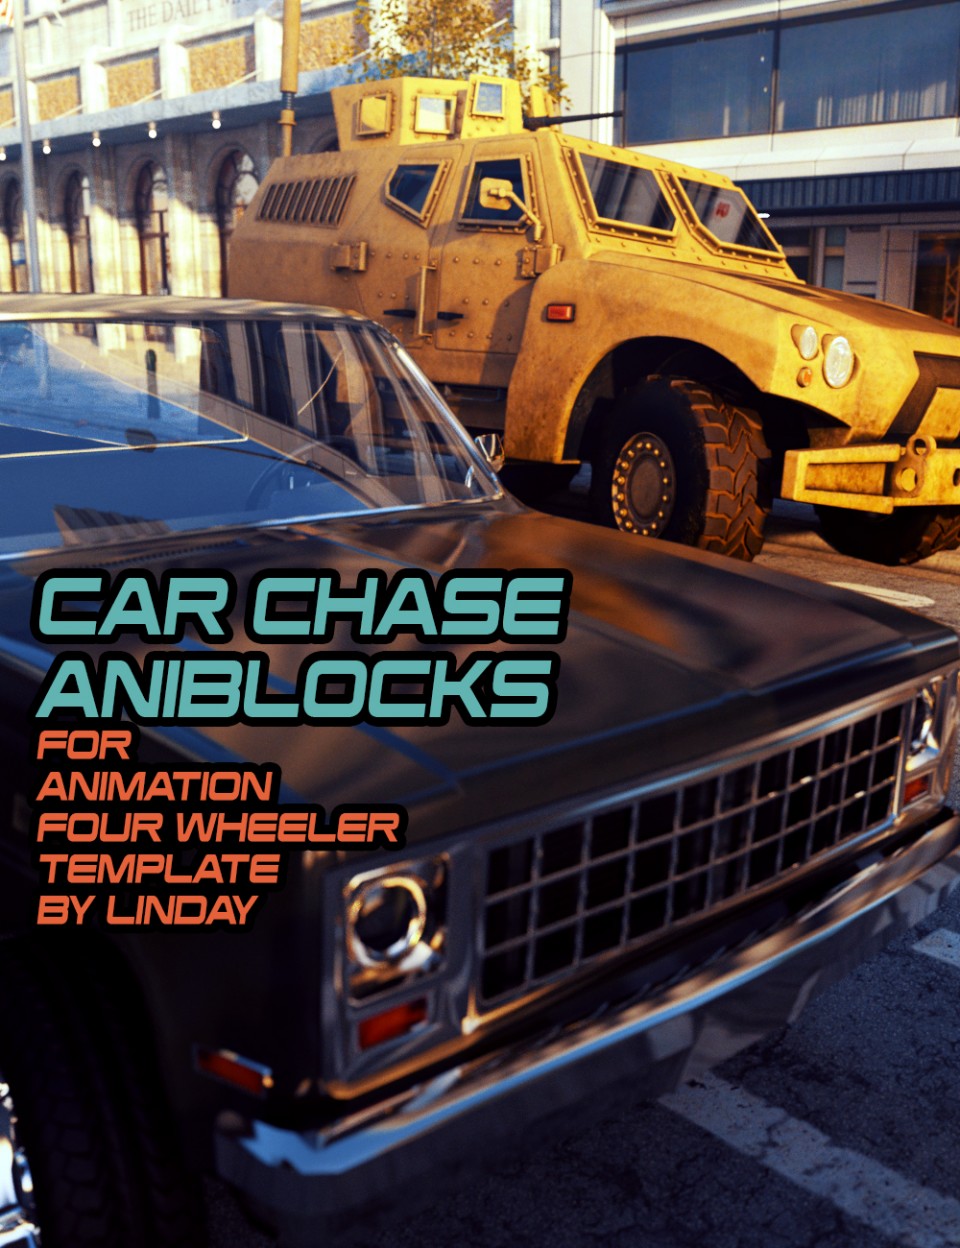 Car Chase aniBlocks for Animation Four Wheeler Template